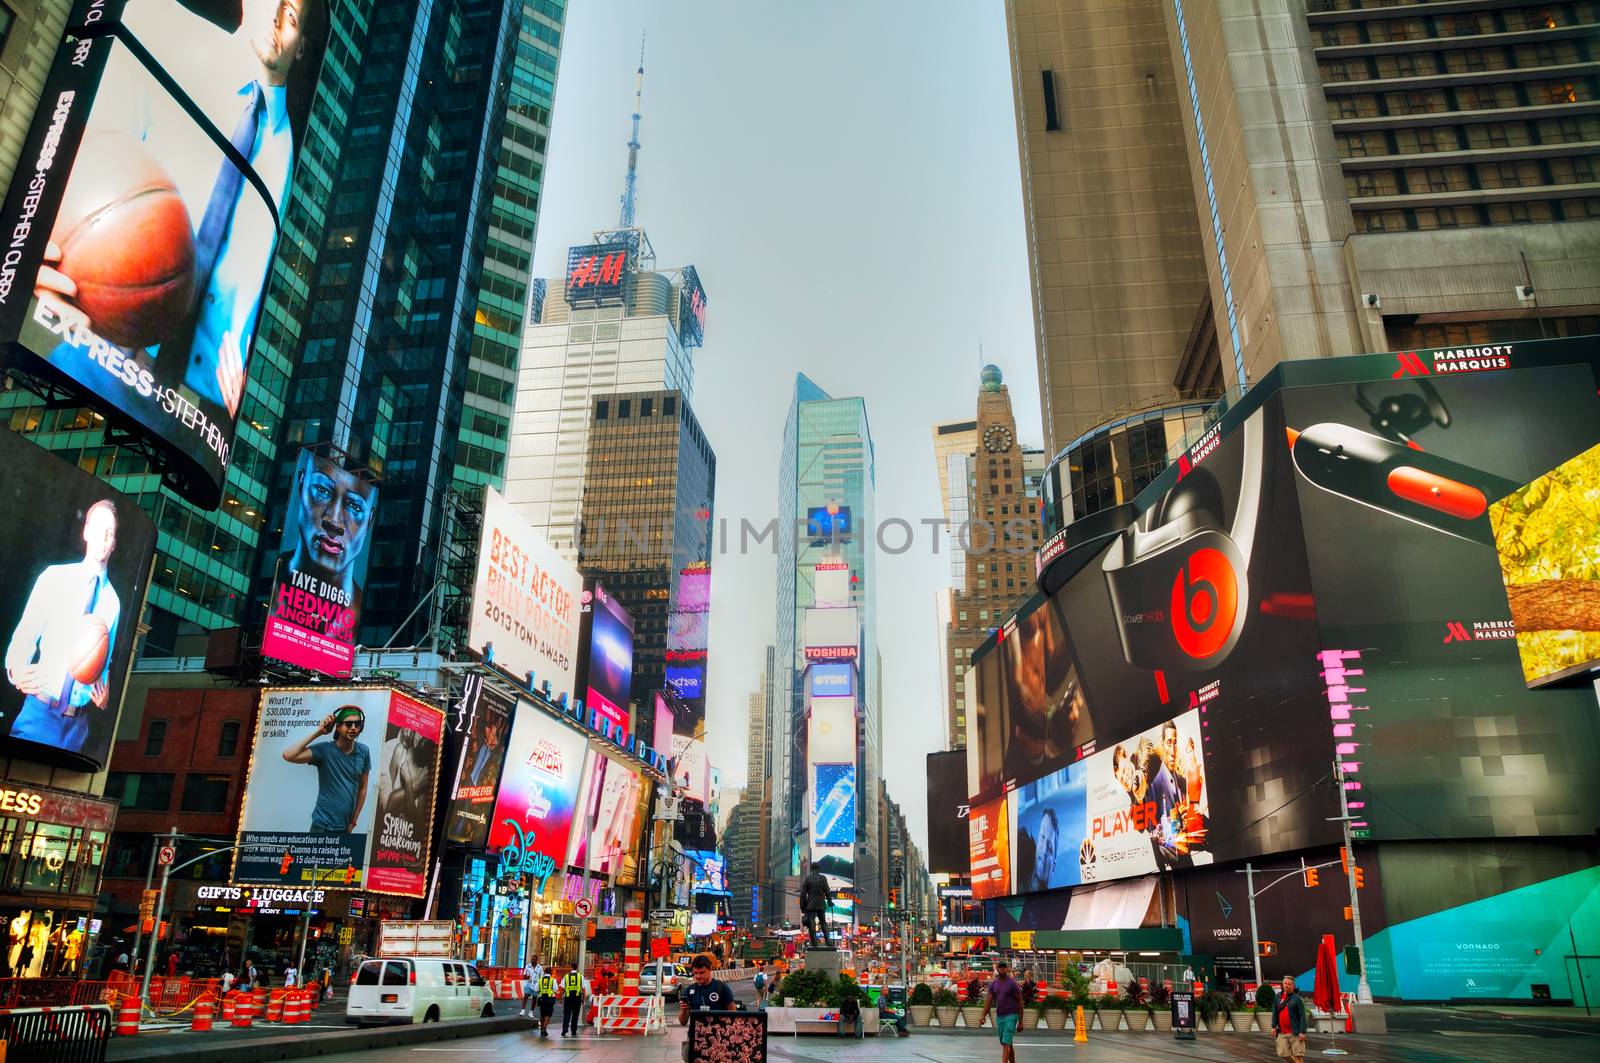 NEW YORK CITY - SEPTEMBER 04: Times square with people in the morning on October 4, 2015 in New York City. It's major commercial intersection and neighborhood in Midtown Manhattan at the junction of Broadway and 7th Avenue.